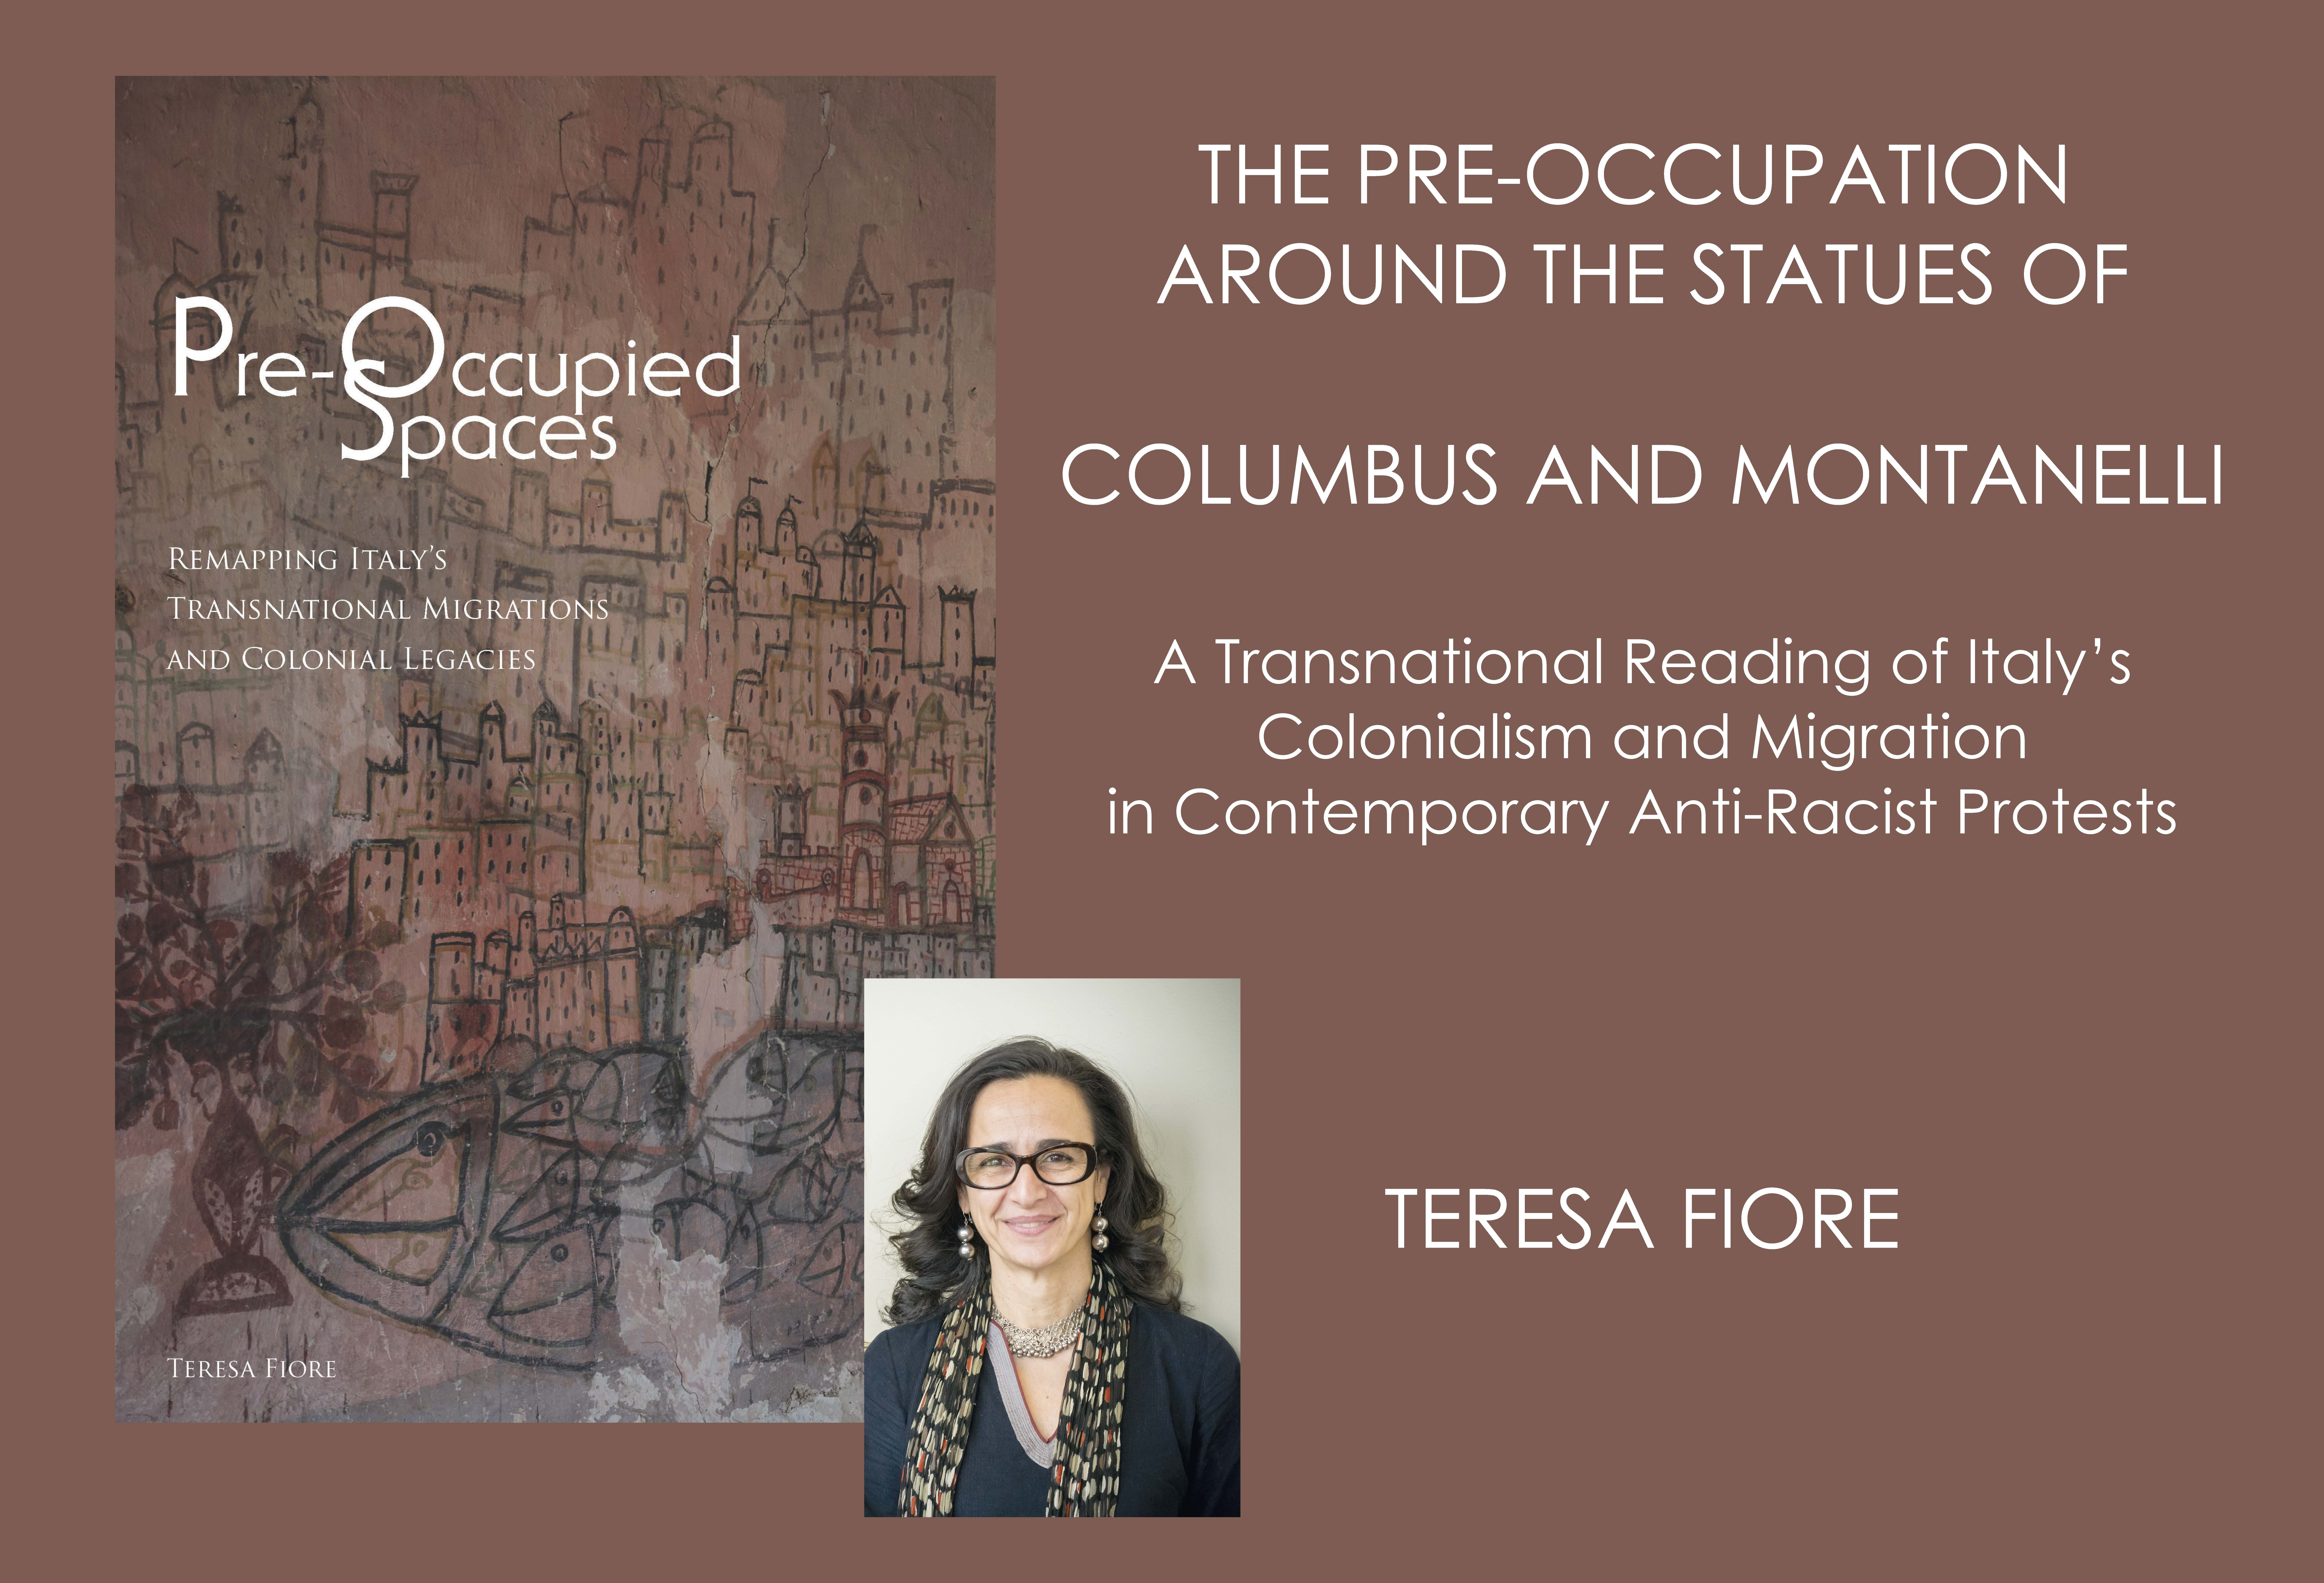 An image of book, Pre-Occupied Spaces, Remapping Italy's Transnational Migrations and Colonial Legacies, Teresa Fiore followed by a photo of the author and an announcement of the event: THE PRE-OCCUPATION AROUND THE STATUES OF COLUMBUS AND MONTANELLI: A Transnational Reading of Italy’s  Colonialism and Migration  in Contemporary Anti-Racist Protests TERESA FIORE